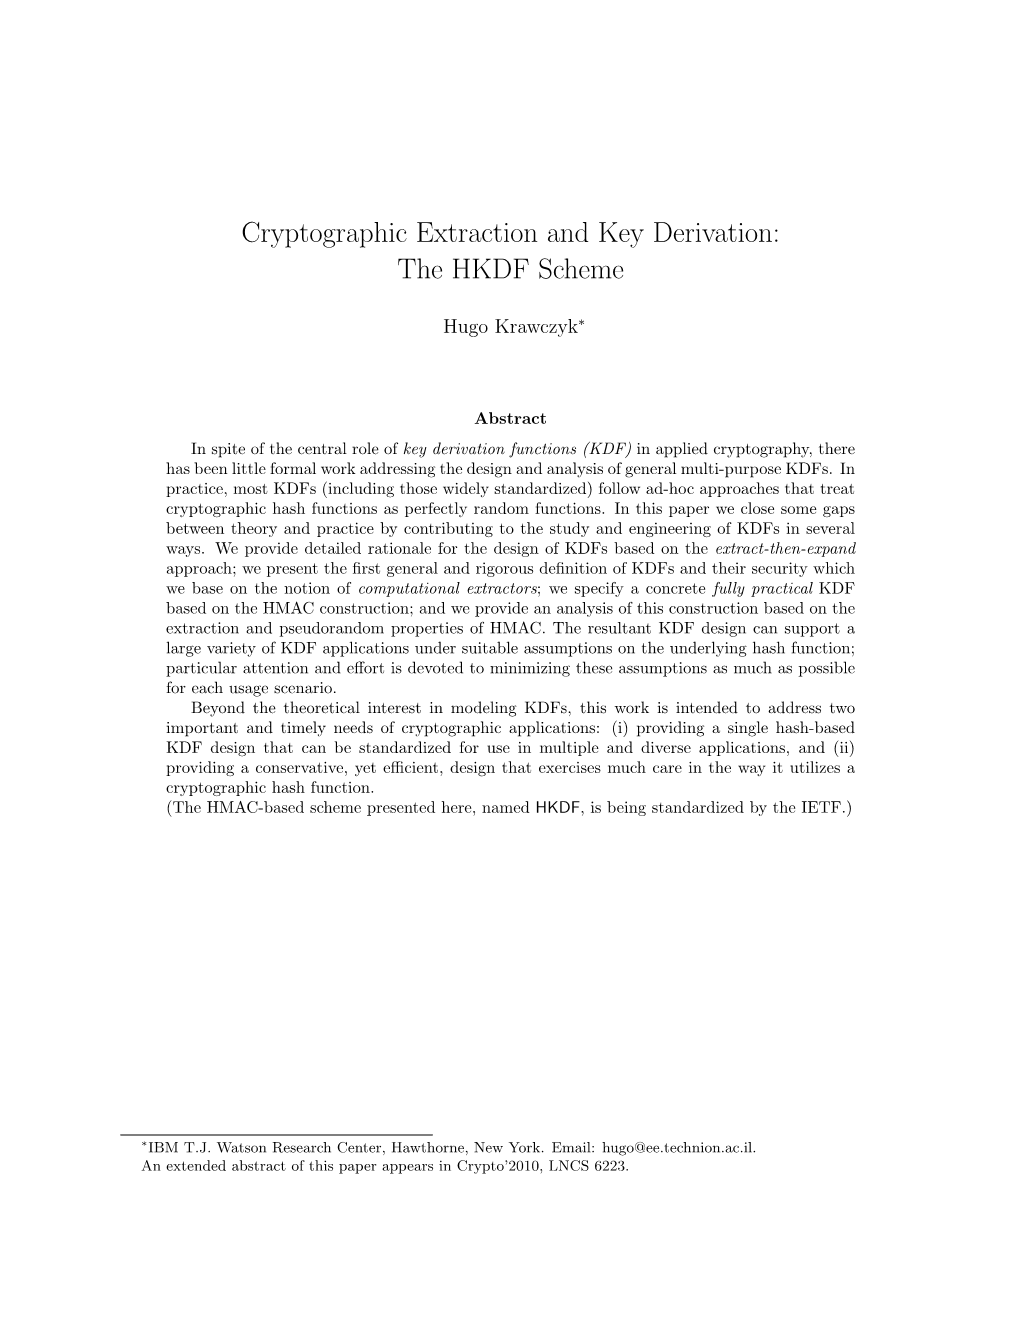 Cryptographic Extraction and Key Derivation: the HKDF Scheme